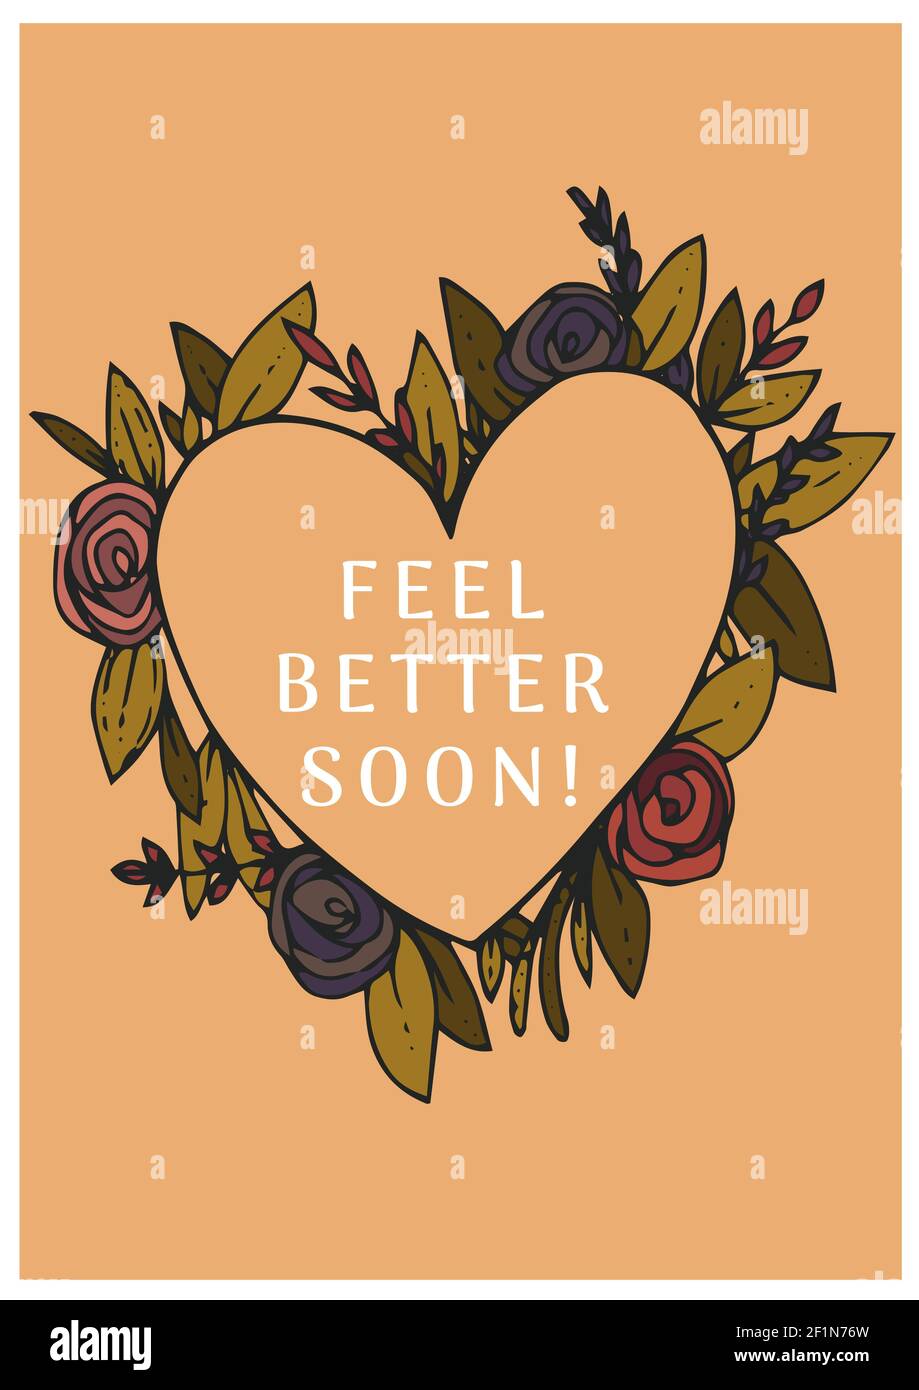 Feel better soon text in heart and flowers on orange background Stock Photo